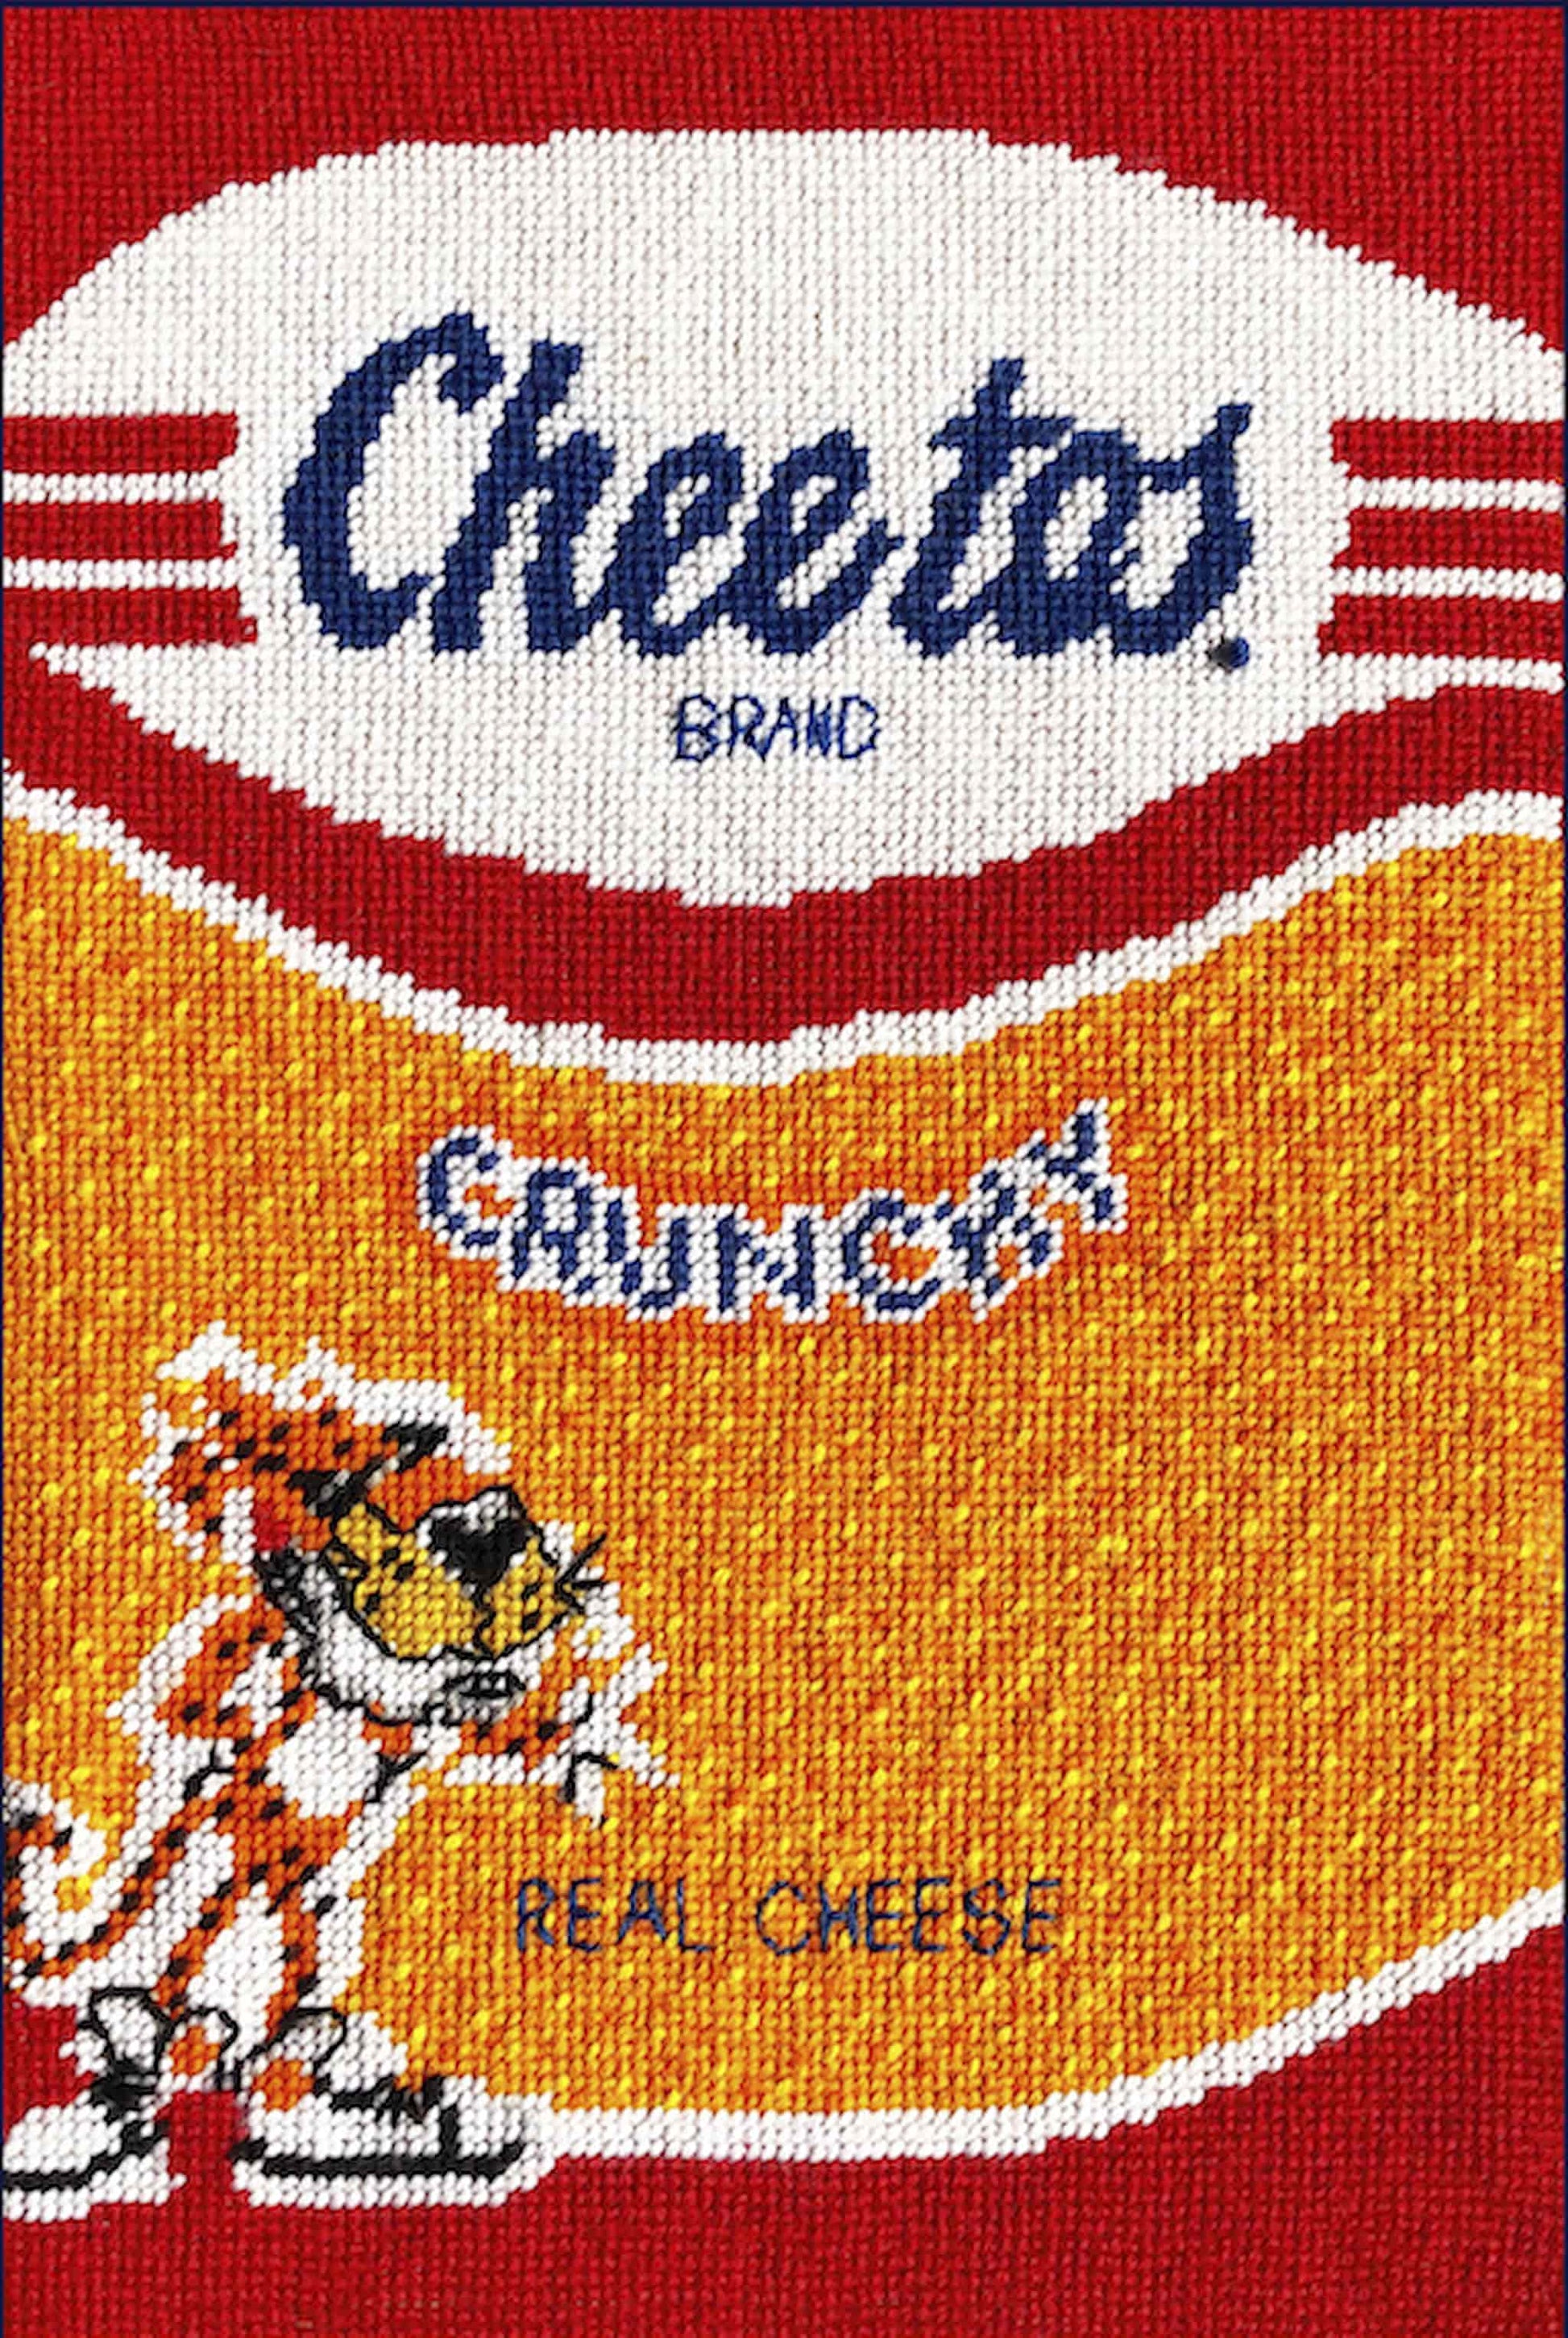 Tea towel with Cheetos crunchy logo and Chester - looks like a bag of Cheetos